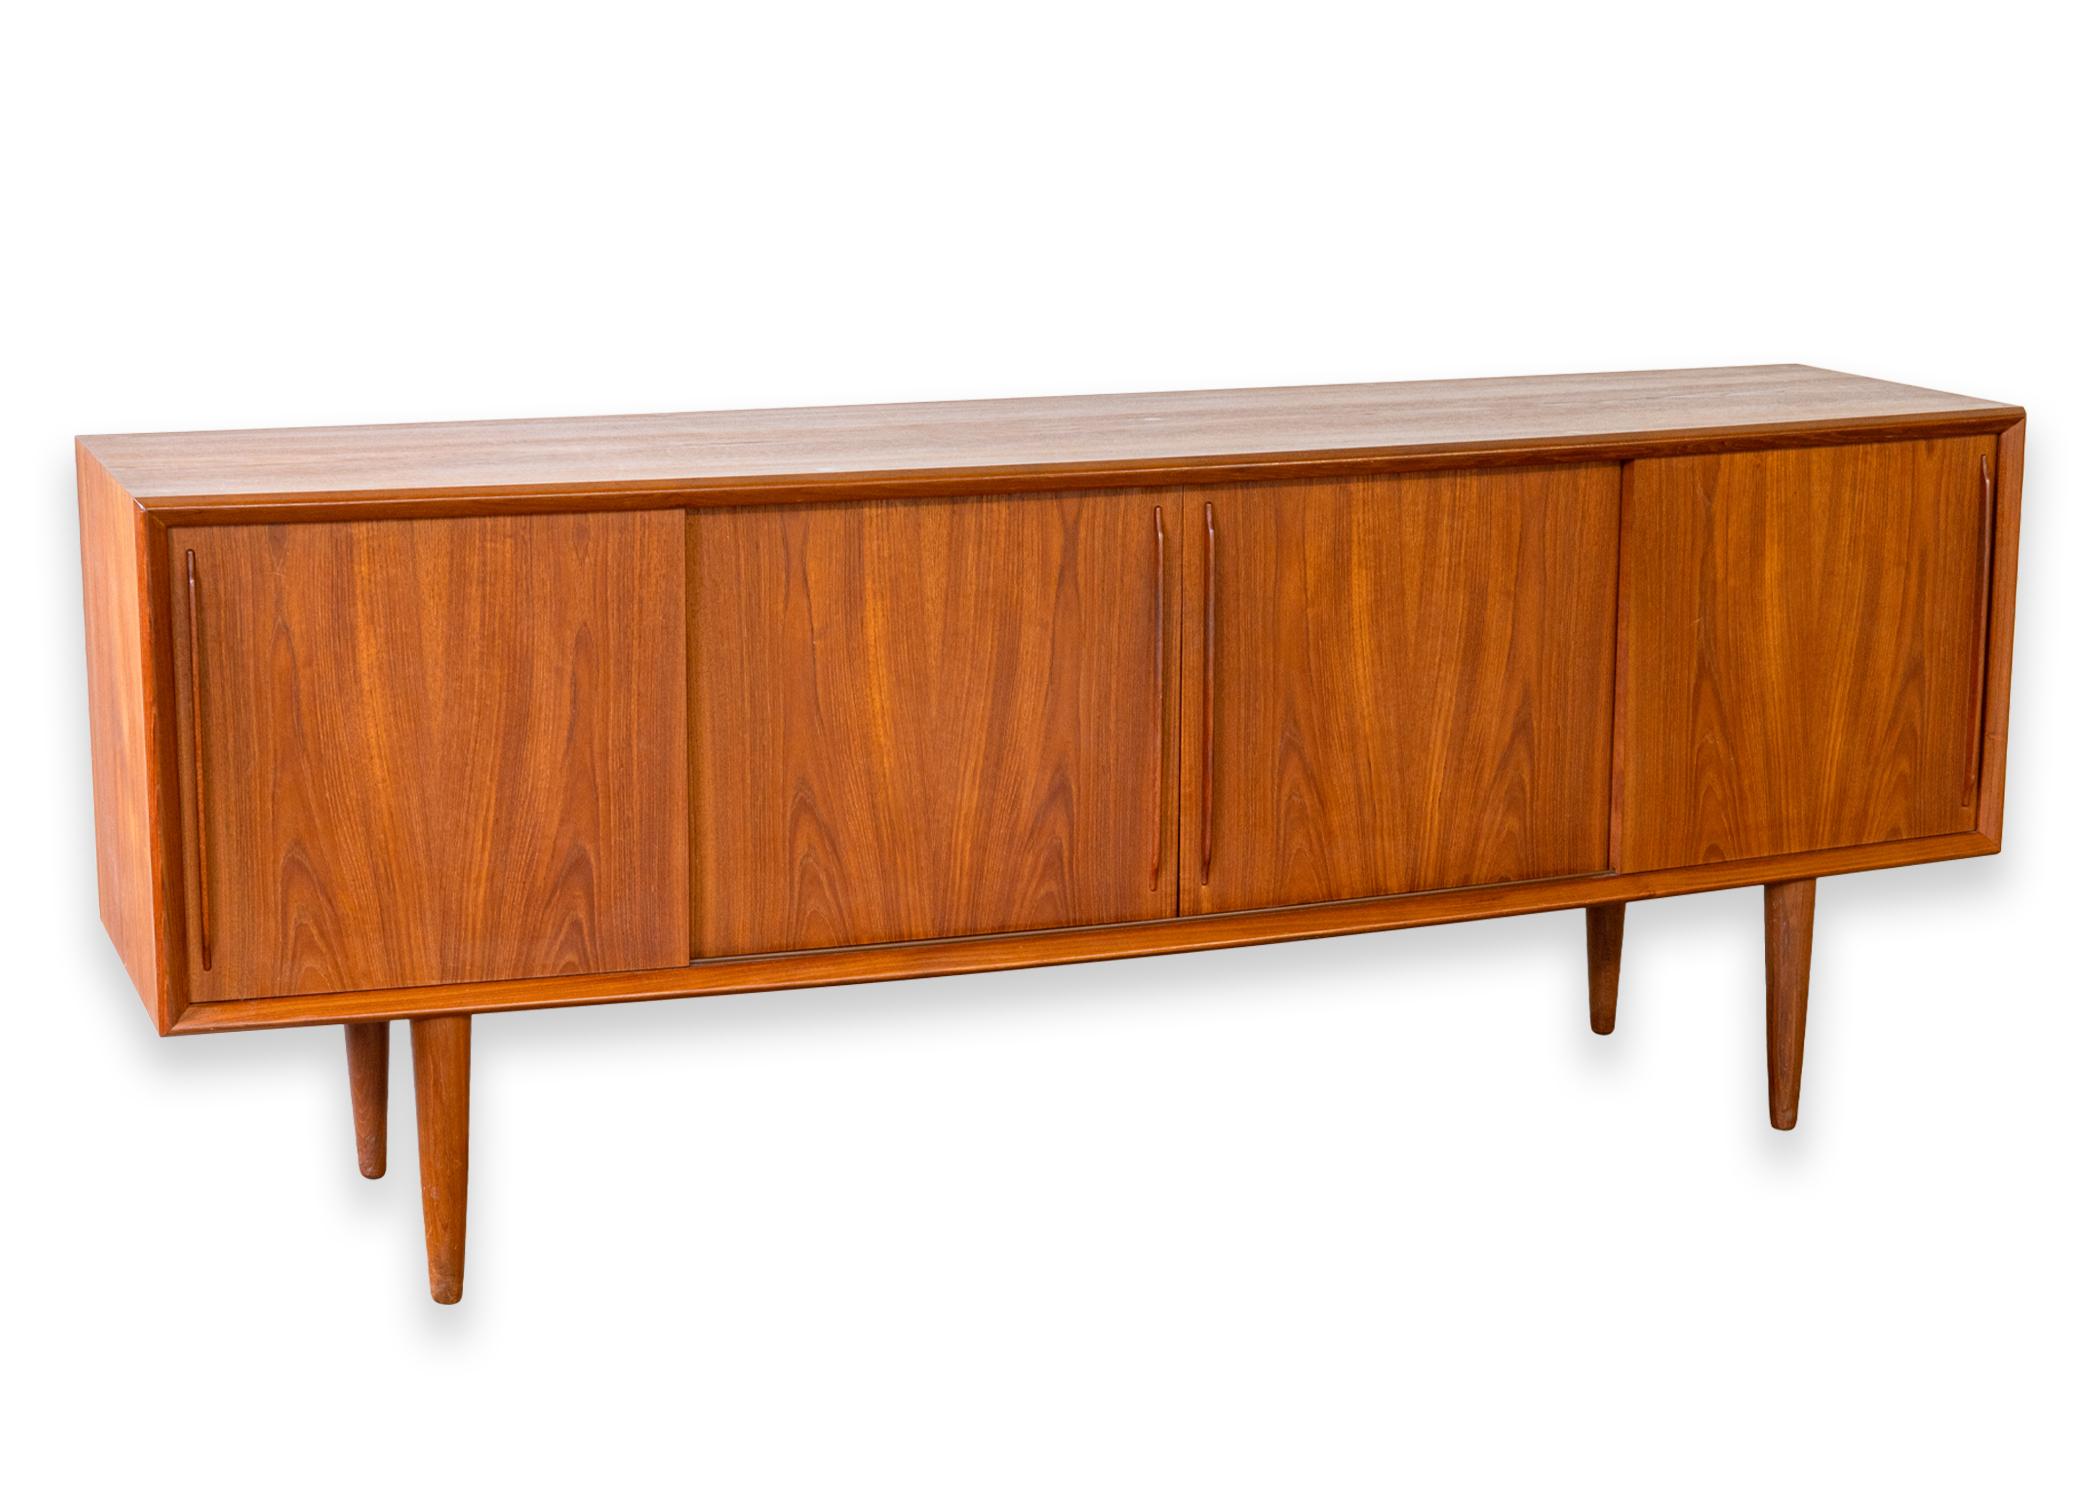 A Danish teak wood credenza. This is an absolutely gorgeous piece designed by Svend Aage Madsen for H.P. Hansen Mobelindustries in the 1960s. This piece is a truly remarkable statement that has stood the test of time. It is equal parts function and